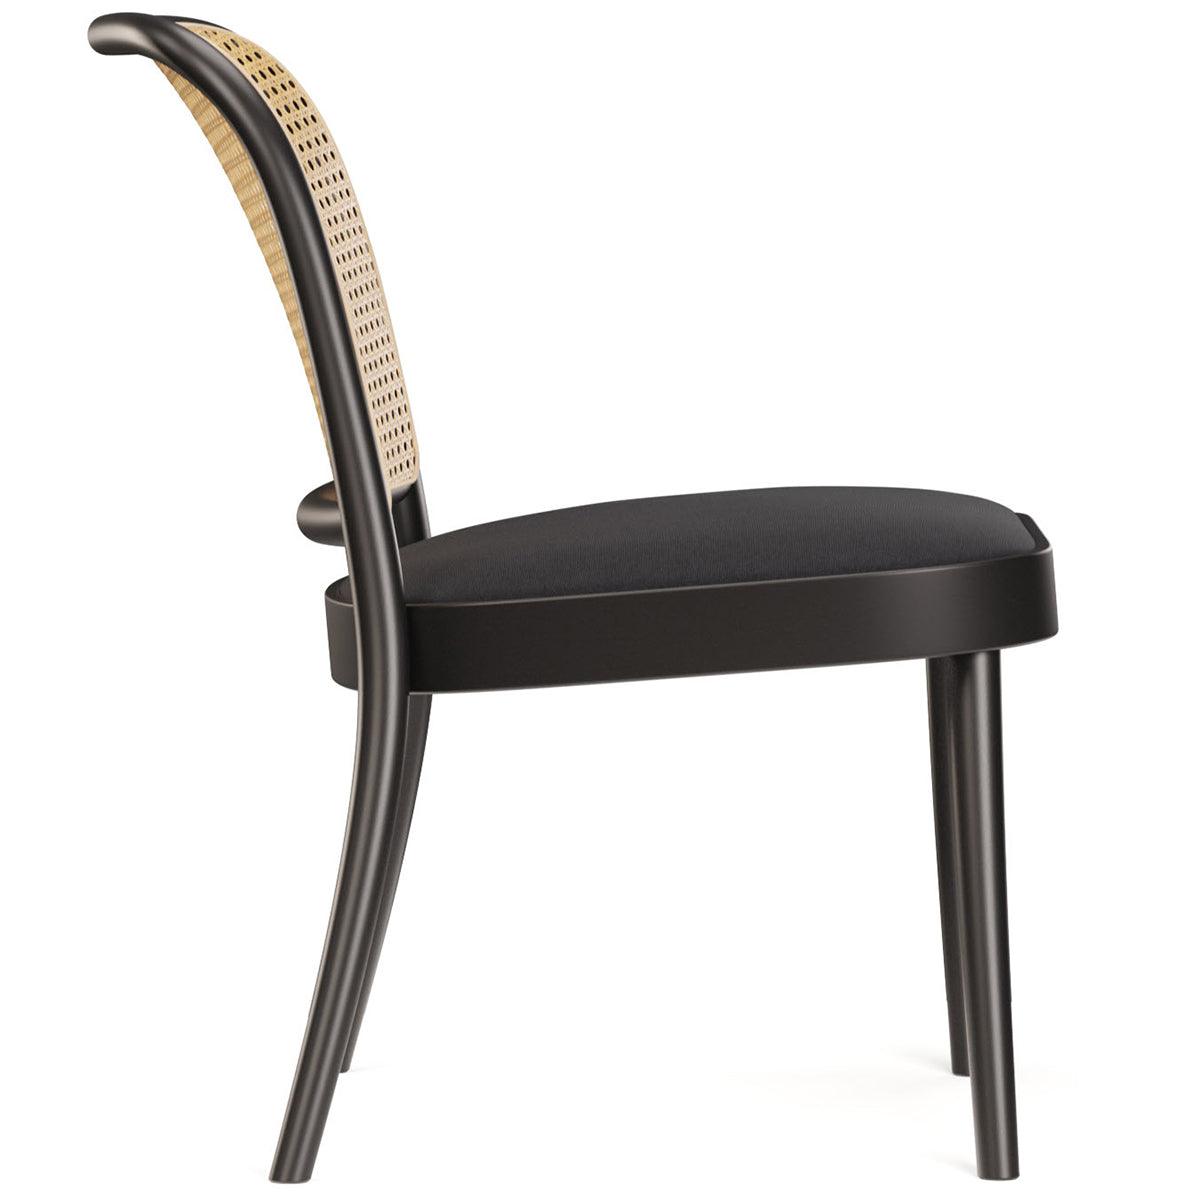 811 Upholstered/Cane Lounge Chair - WOO .Design